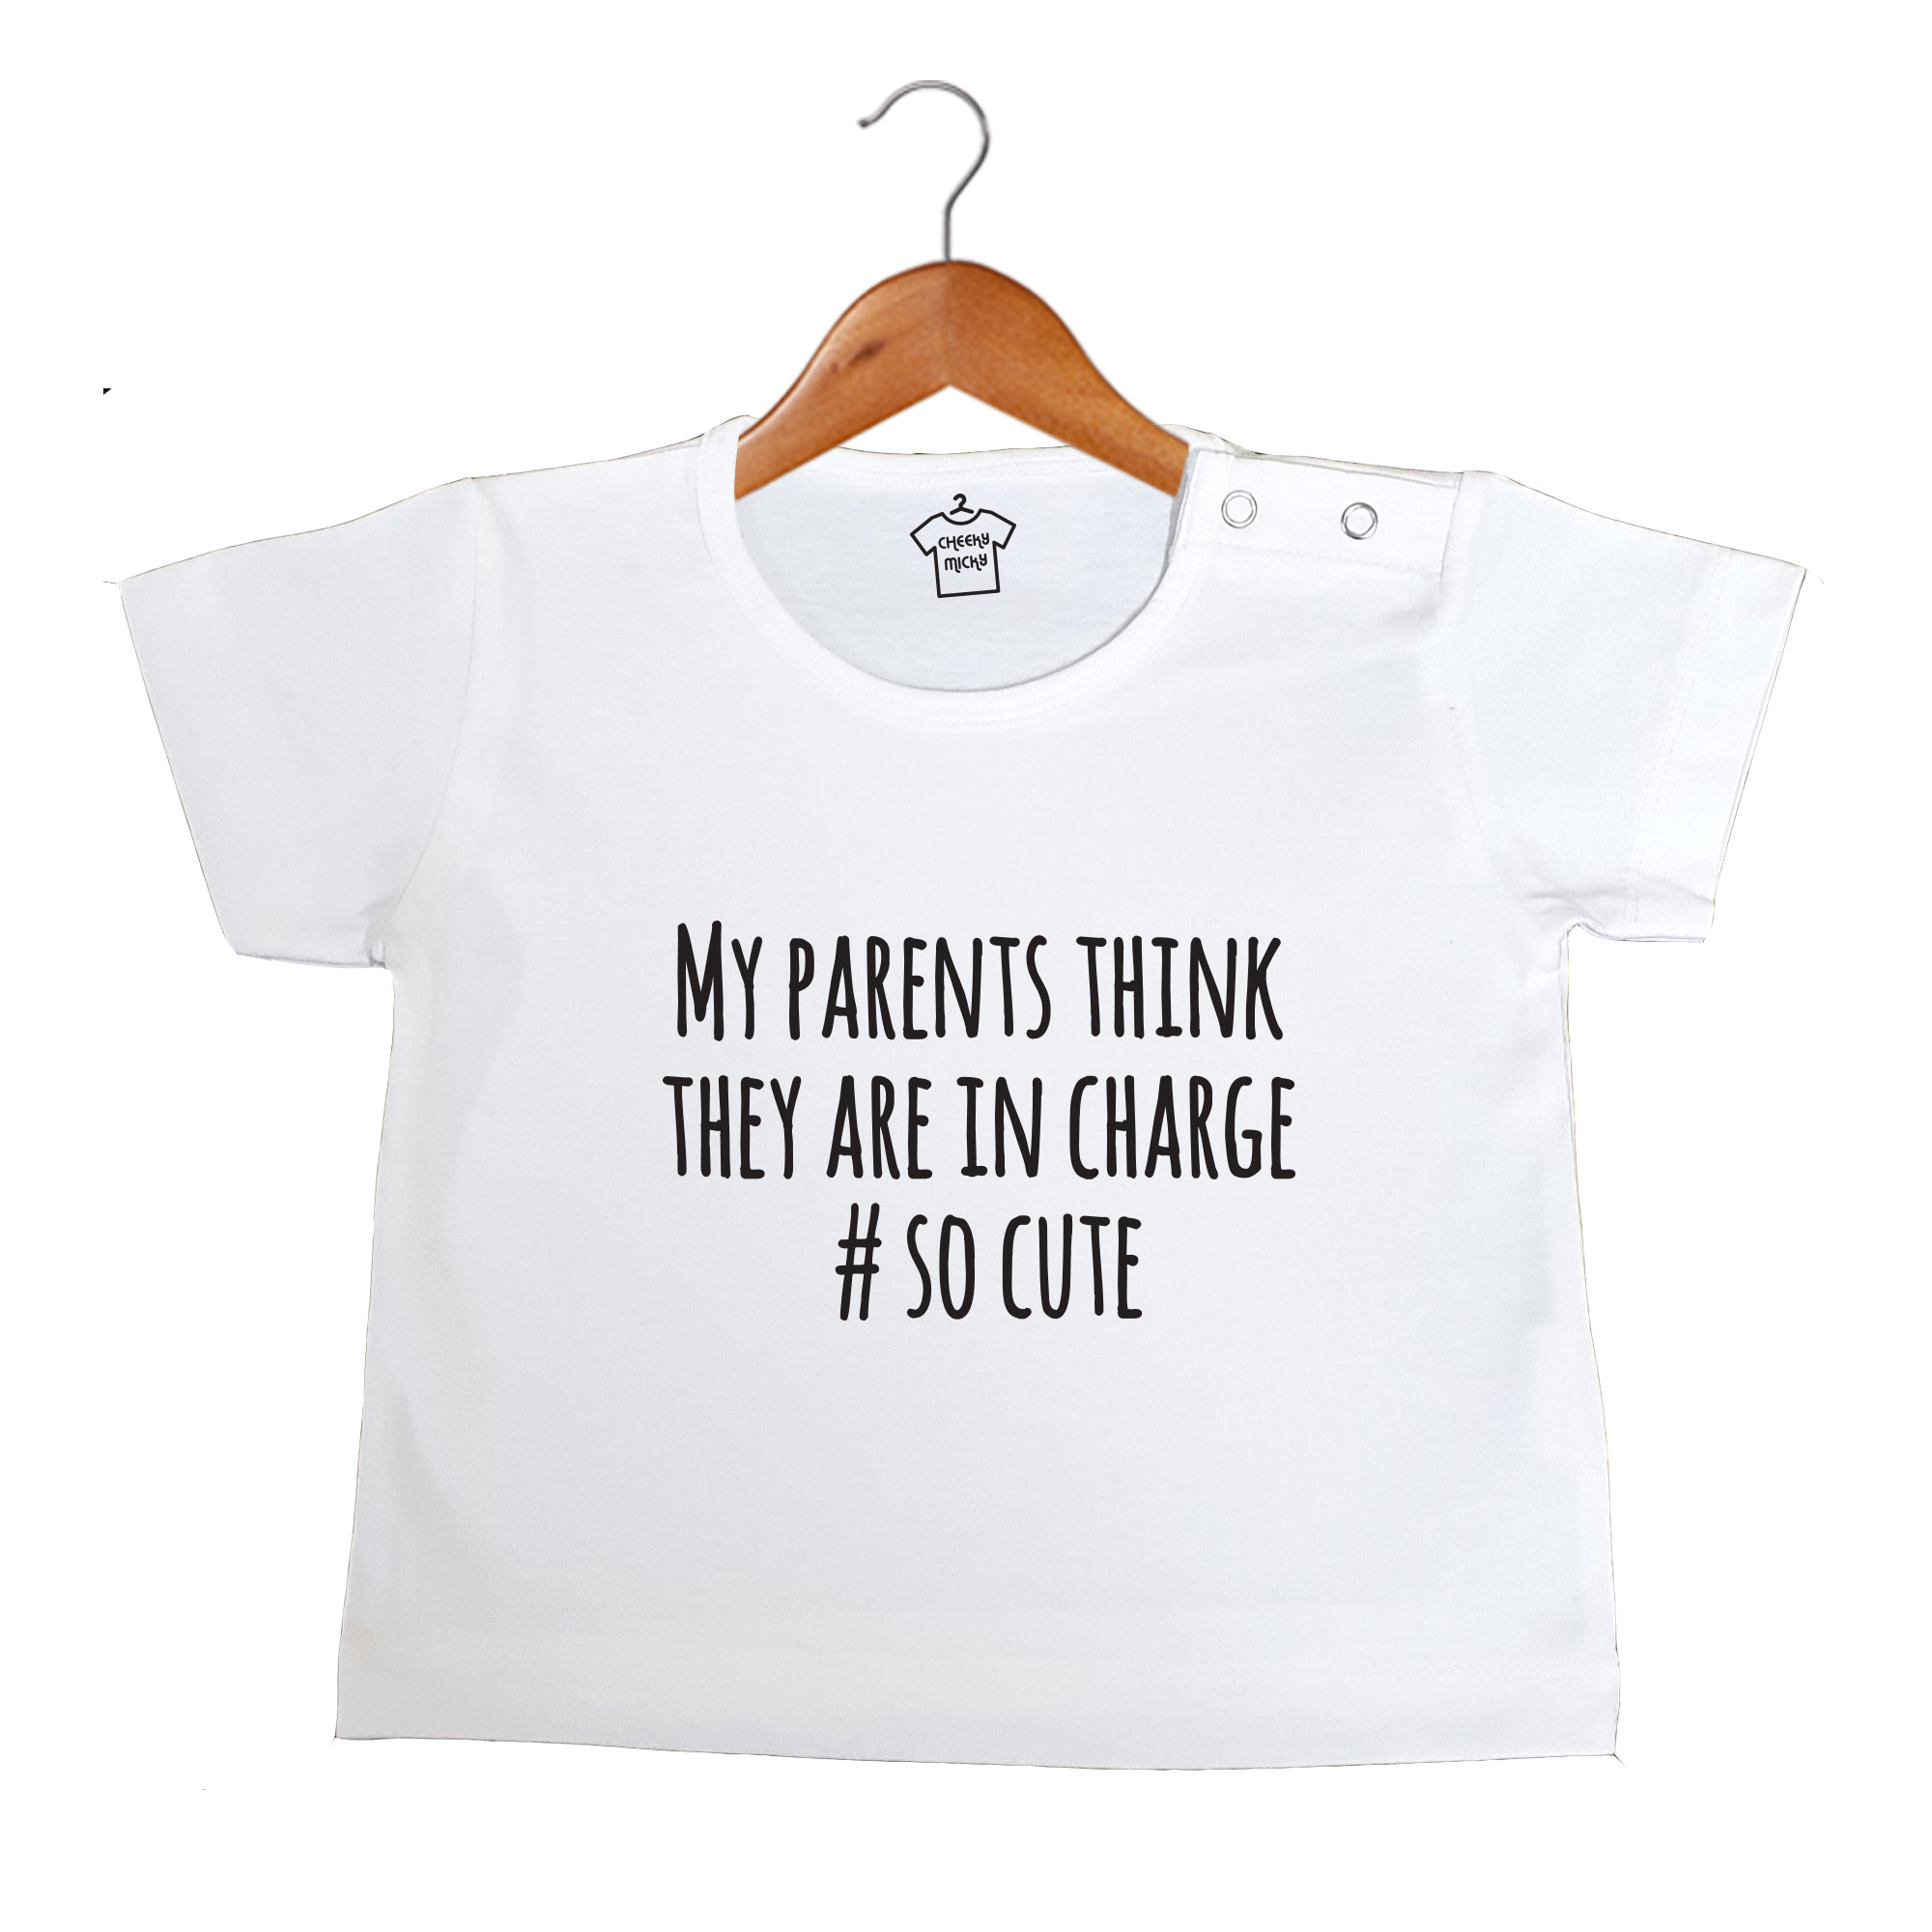 White T-shirt, 100% cotton, machine washable. Age 6-12 months. Print: My Parents Think They Are In Charge #socute.